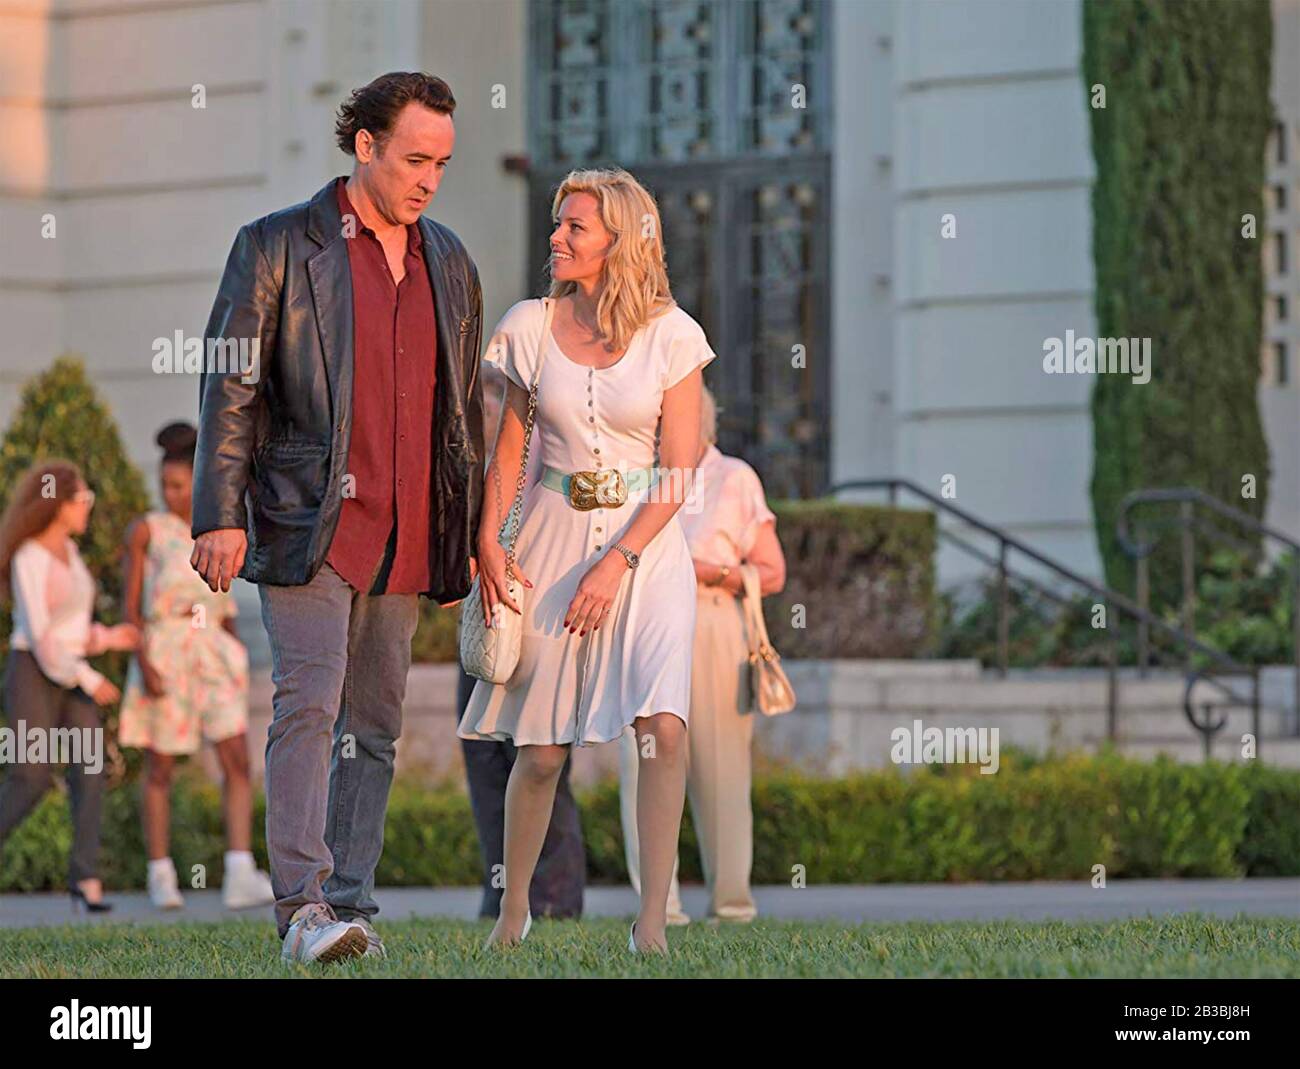 LOVE AND MERCY 2014 Lionsgate film with Elizabeth Banks and John Cusack Stock Photo